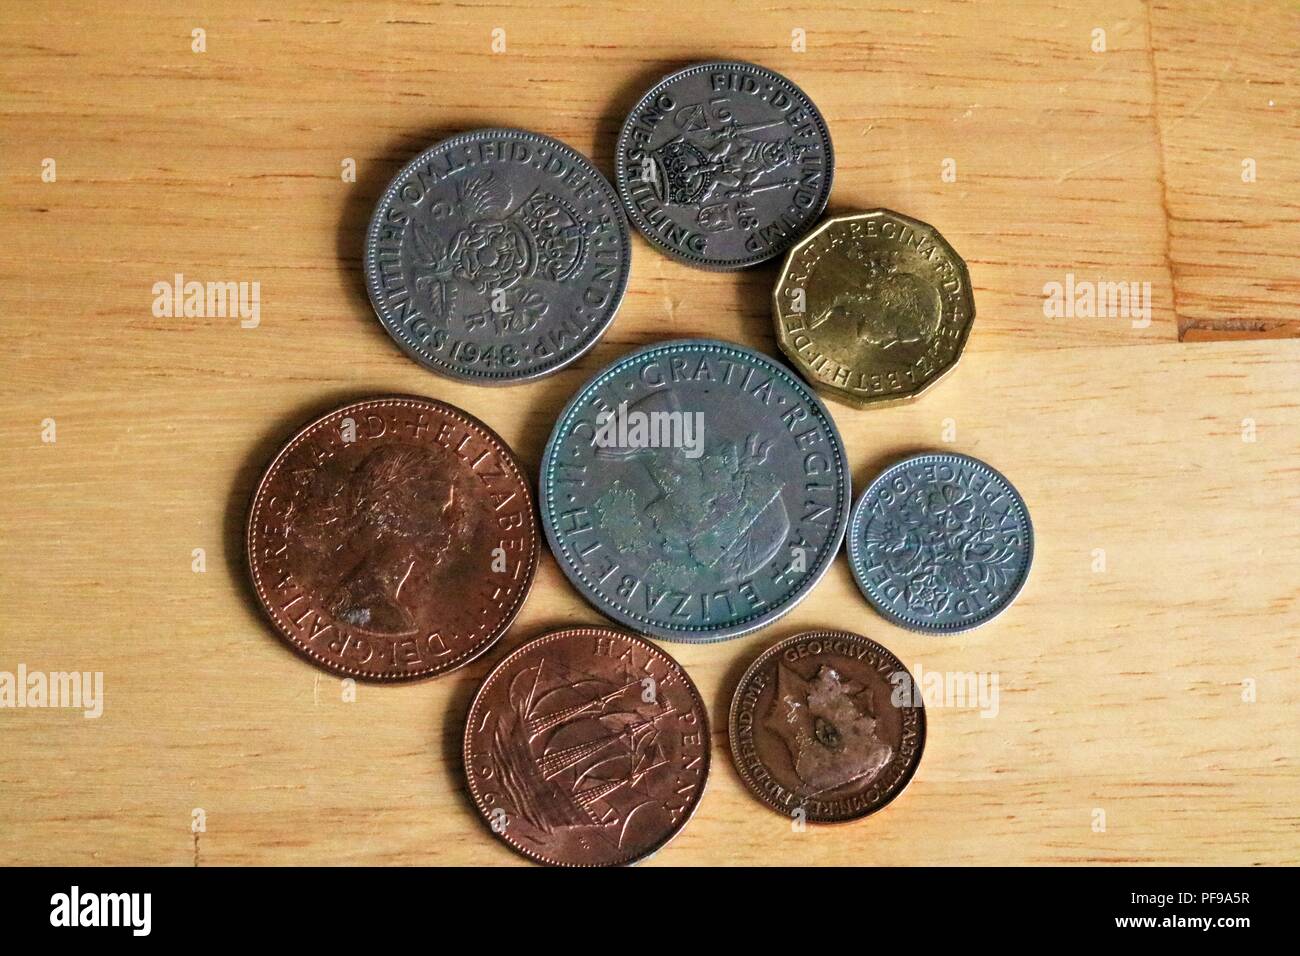 Pre-decimal currency in Britain (before 1971) - Shillings, six pence, half crown, three pence, half penny, farthing Stock Photo